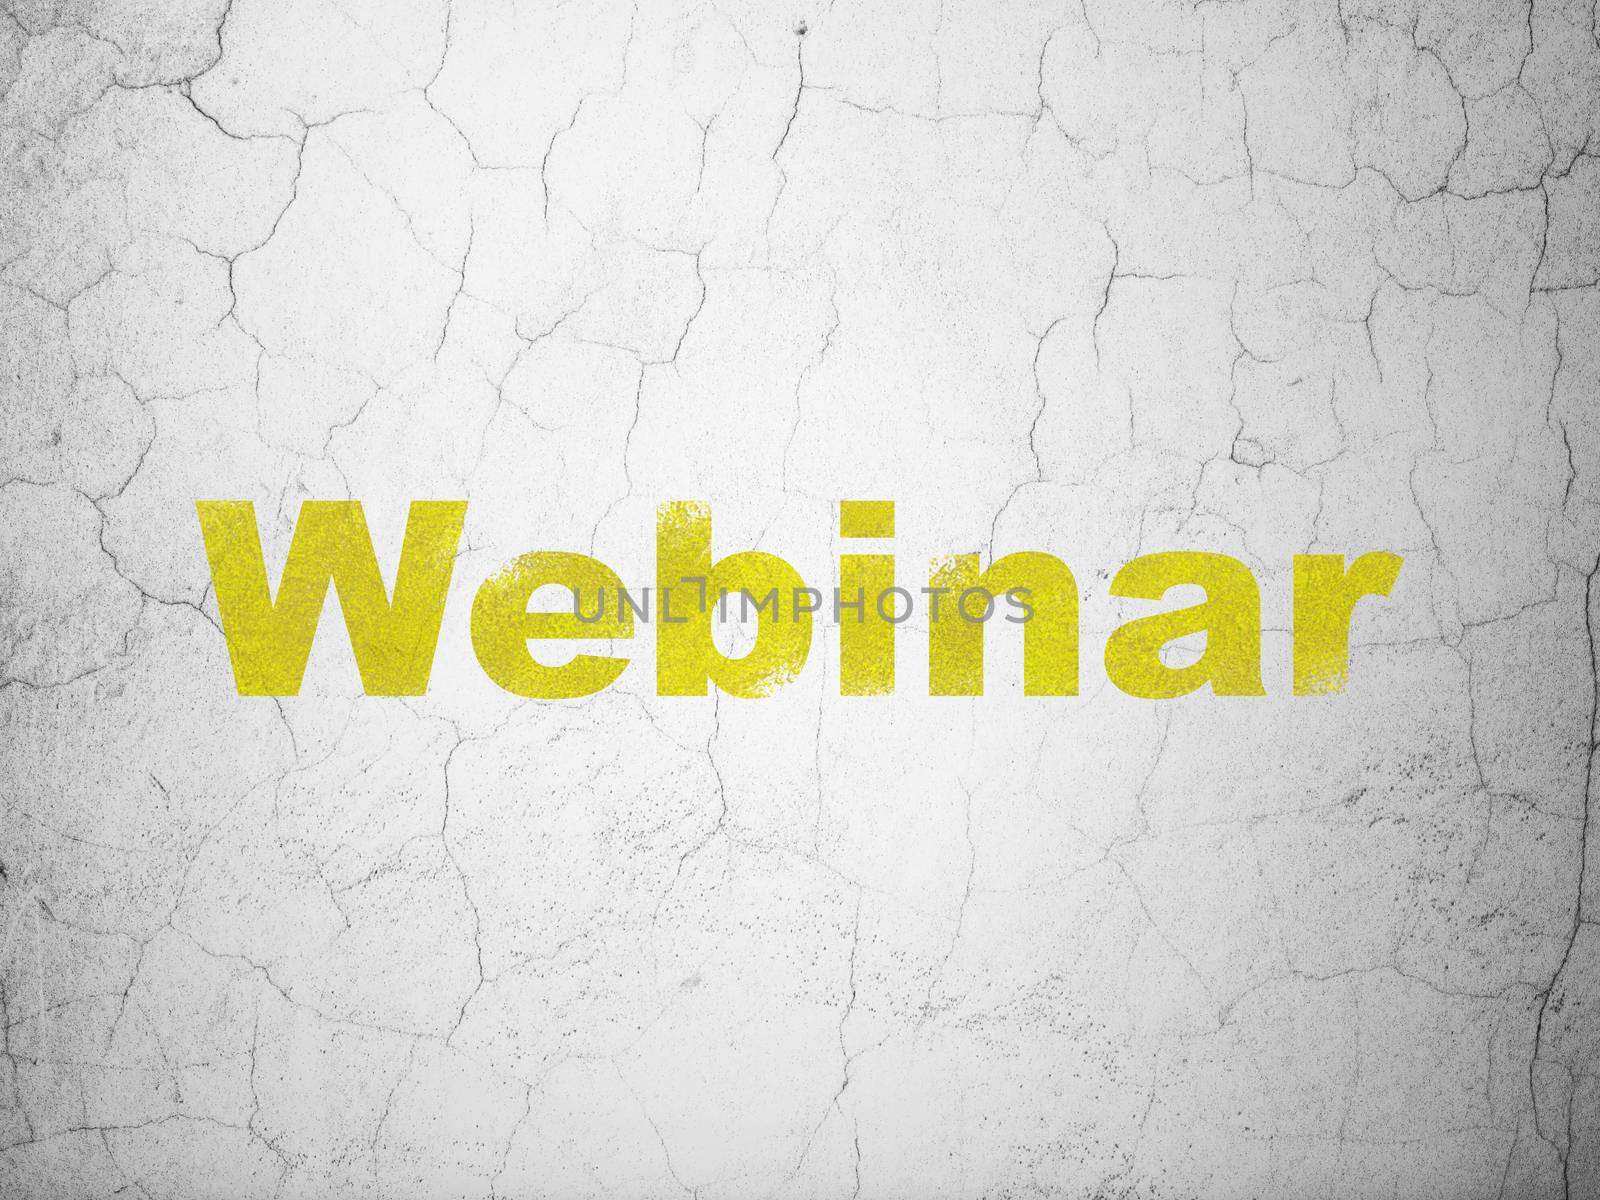 Studying concept: Yellow Webinar on textured concrete wall background